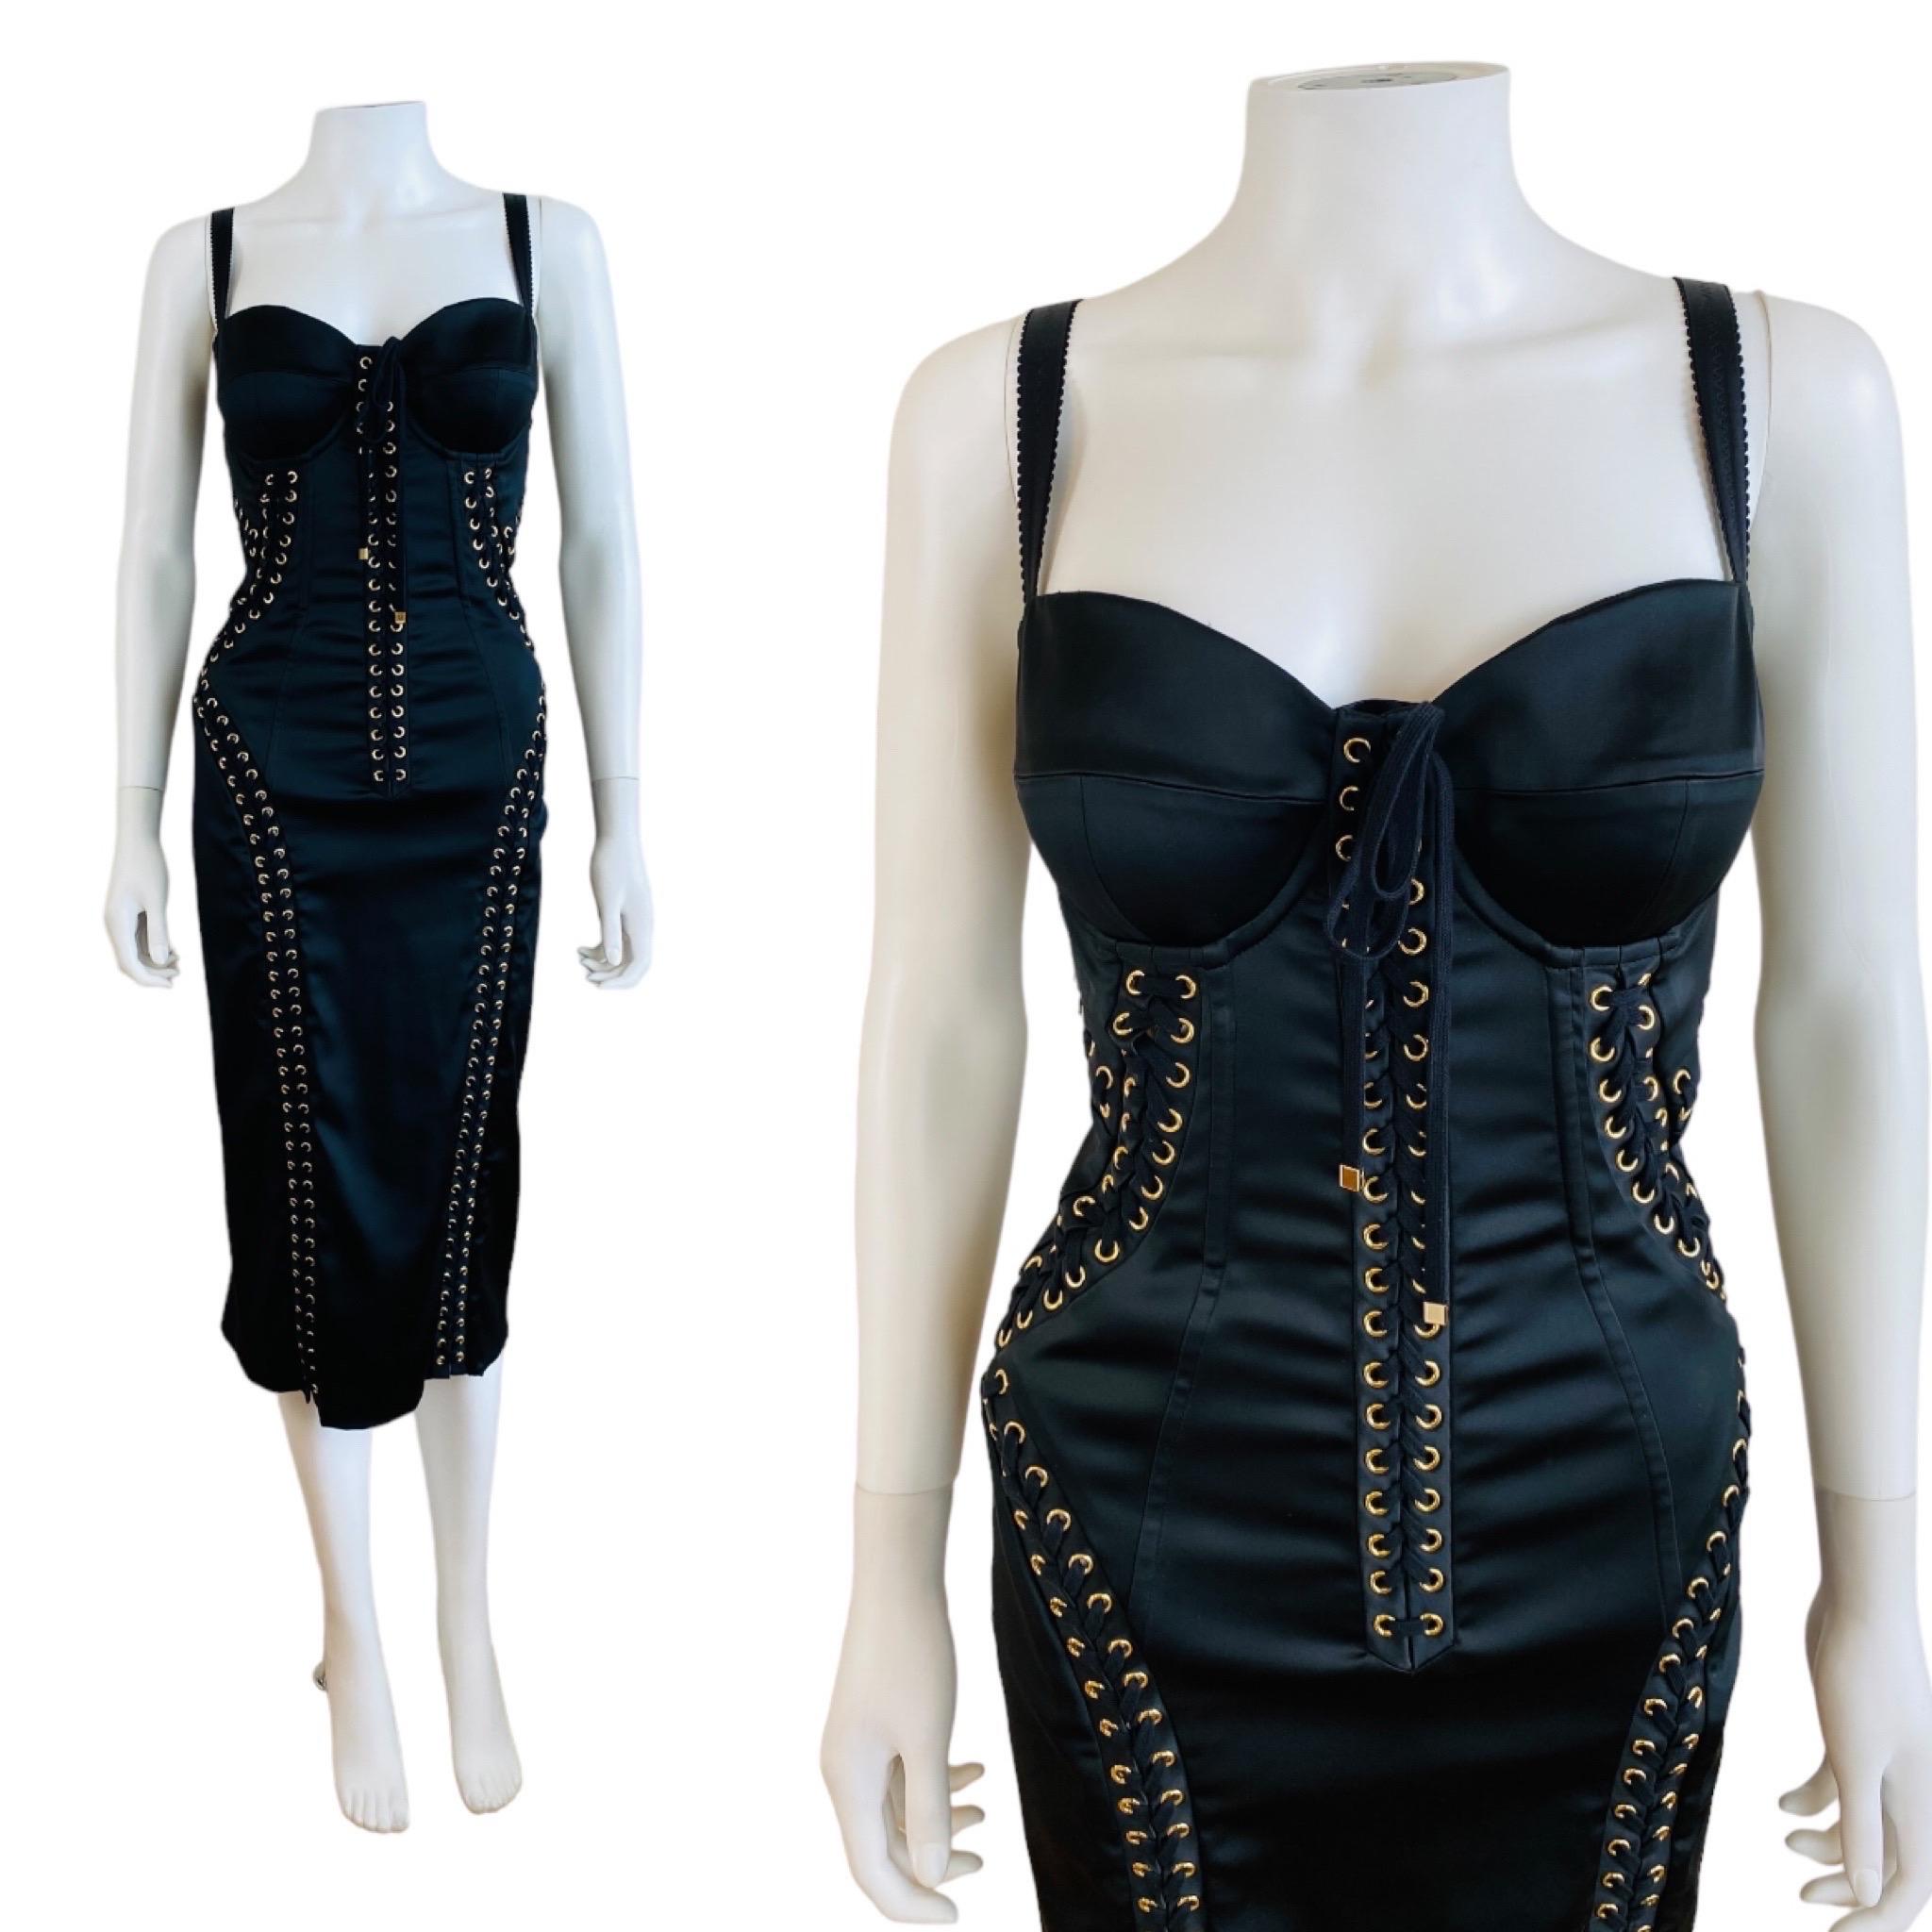 Gorgeous 2019 Dolce + Gabbana corset style dress (shown pinned to mannequin)
Black silk + elastane fabric
Bustier bra style bust with fitted + padded bust cups
Wide adjustable shoulder straps
Wiggle style fit with gold grommets + lacing details